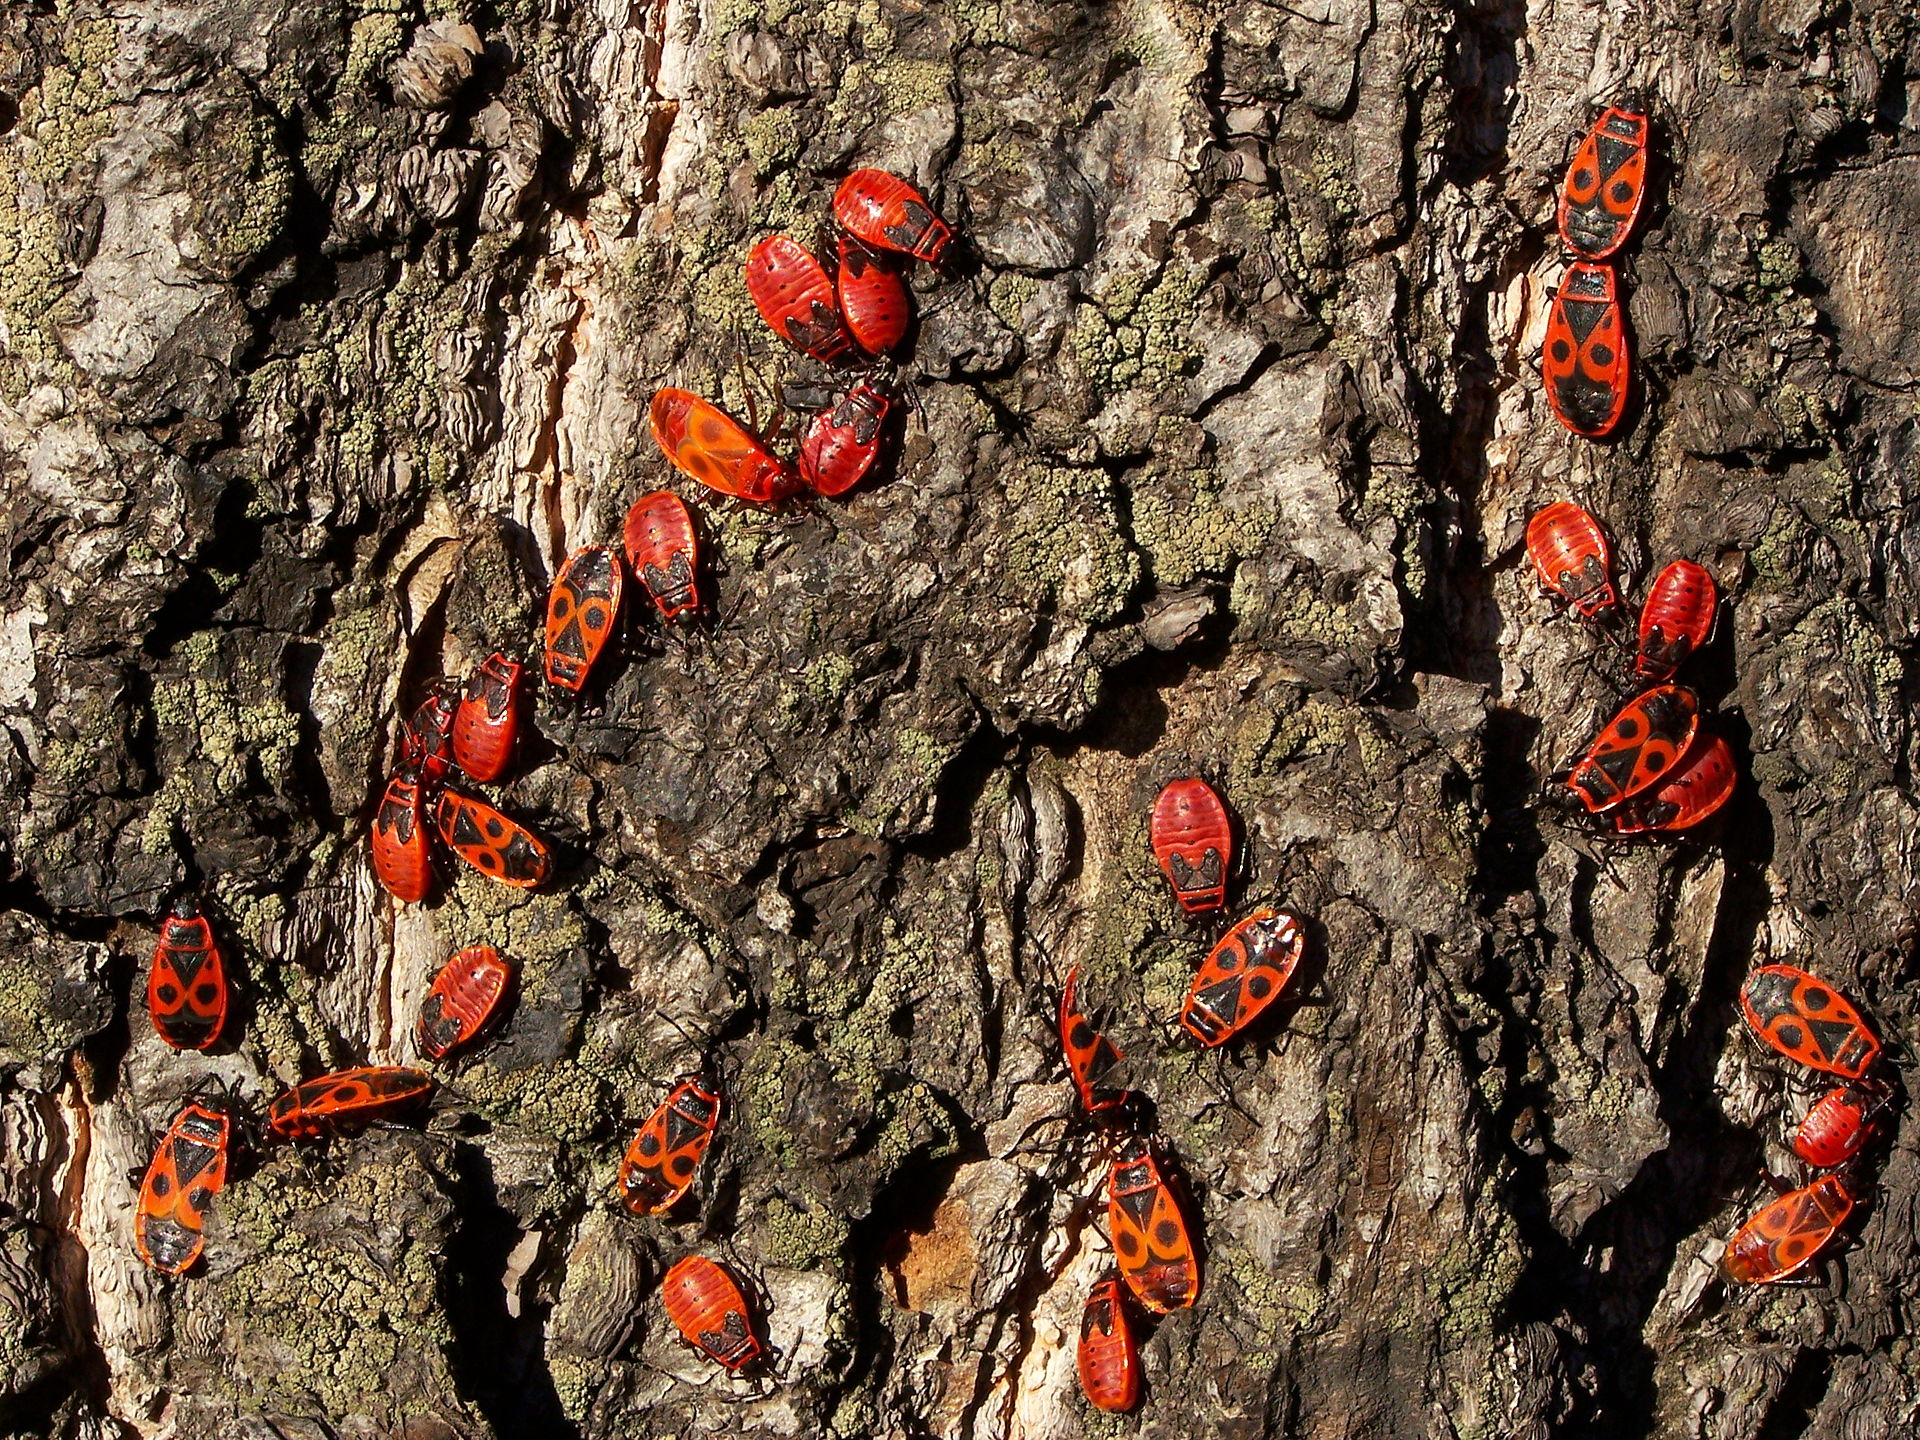 Red fire bug adults and nymphs (Lestat, Wikimedia Commons)